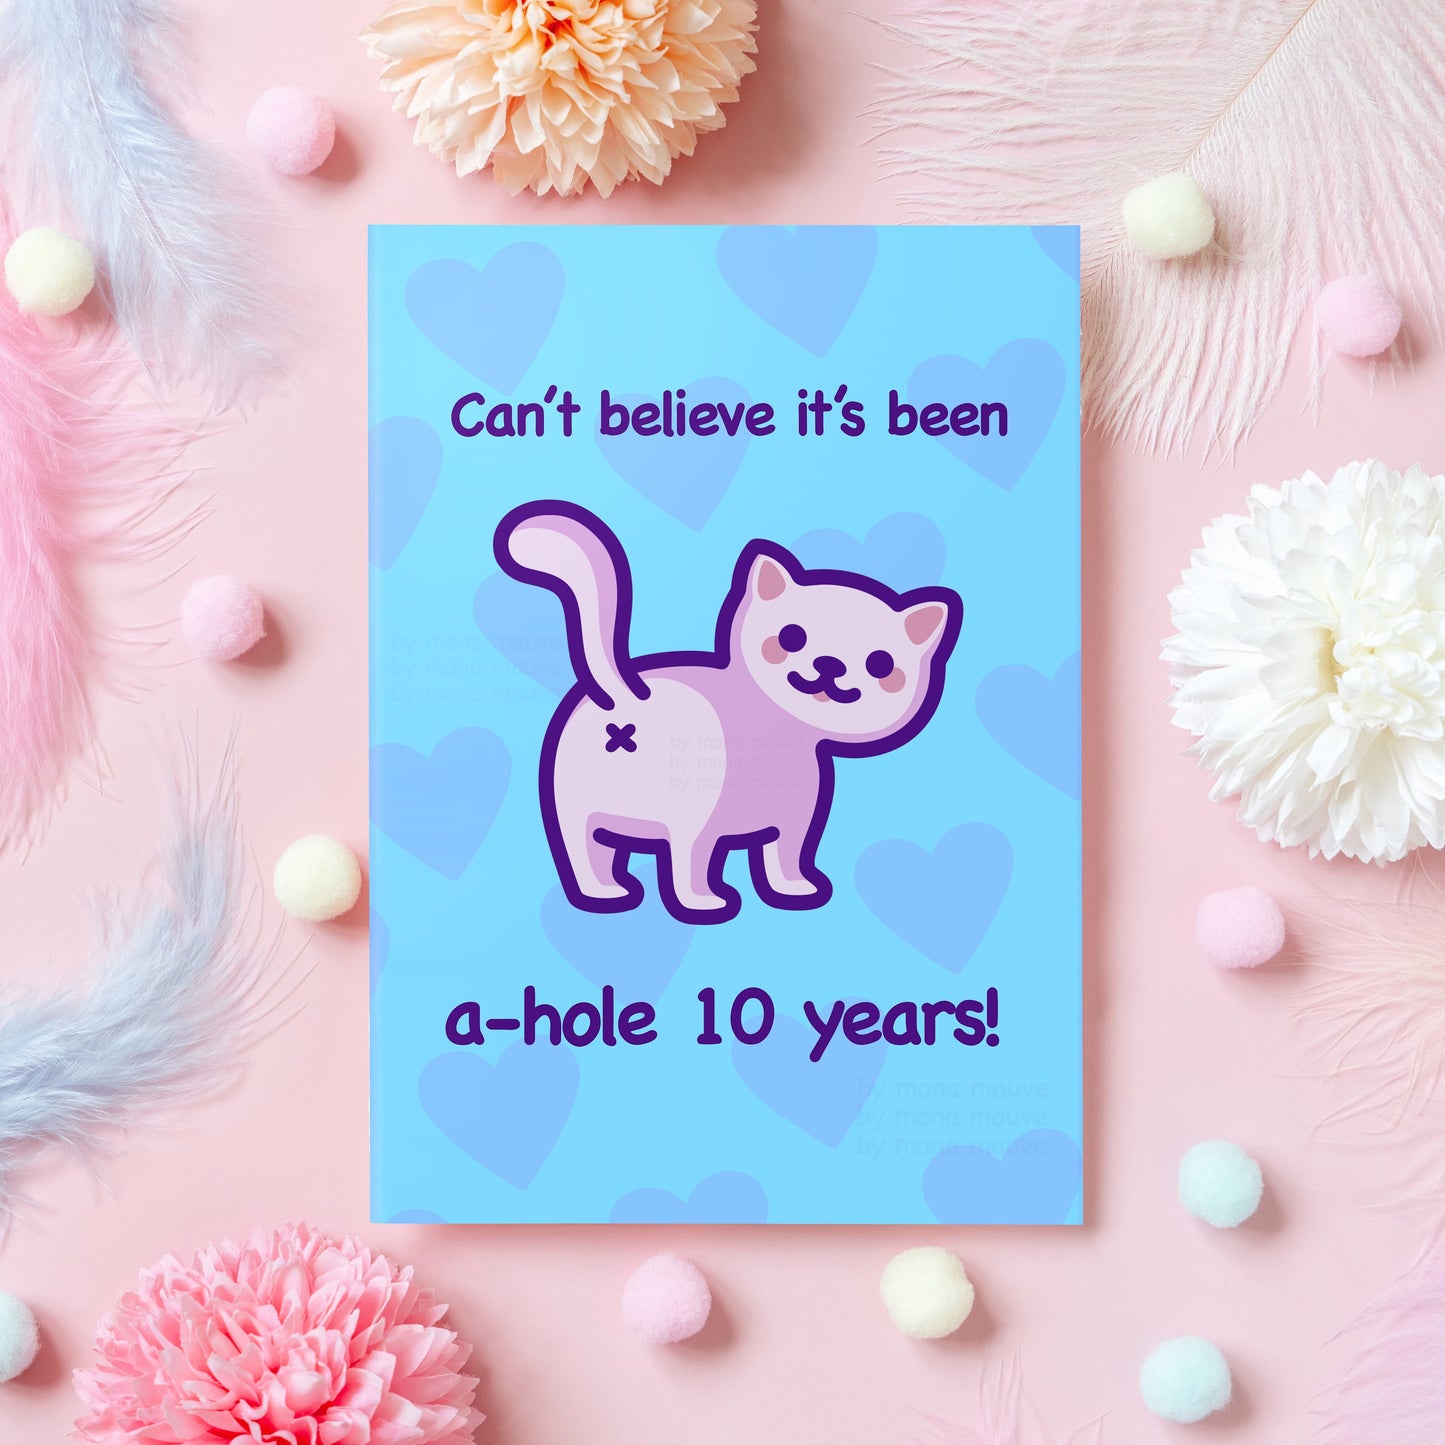 10 year anniversary greeting card with a funny illustration of a white cat with his butt facing the viewer. The card reads: "Can't believe it's been a-hole 10 years!"